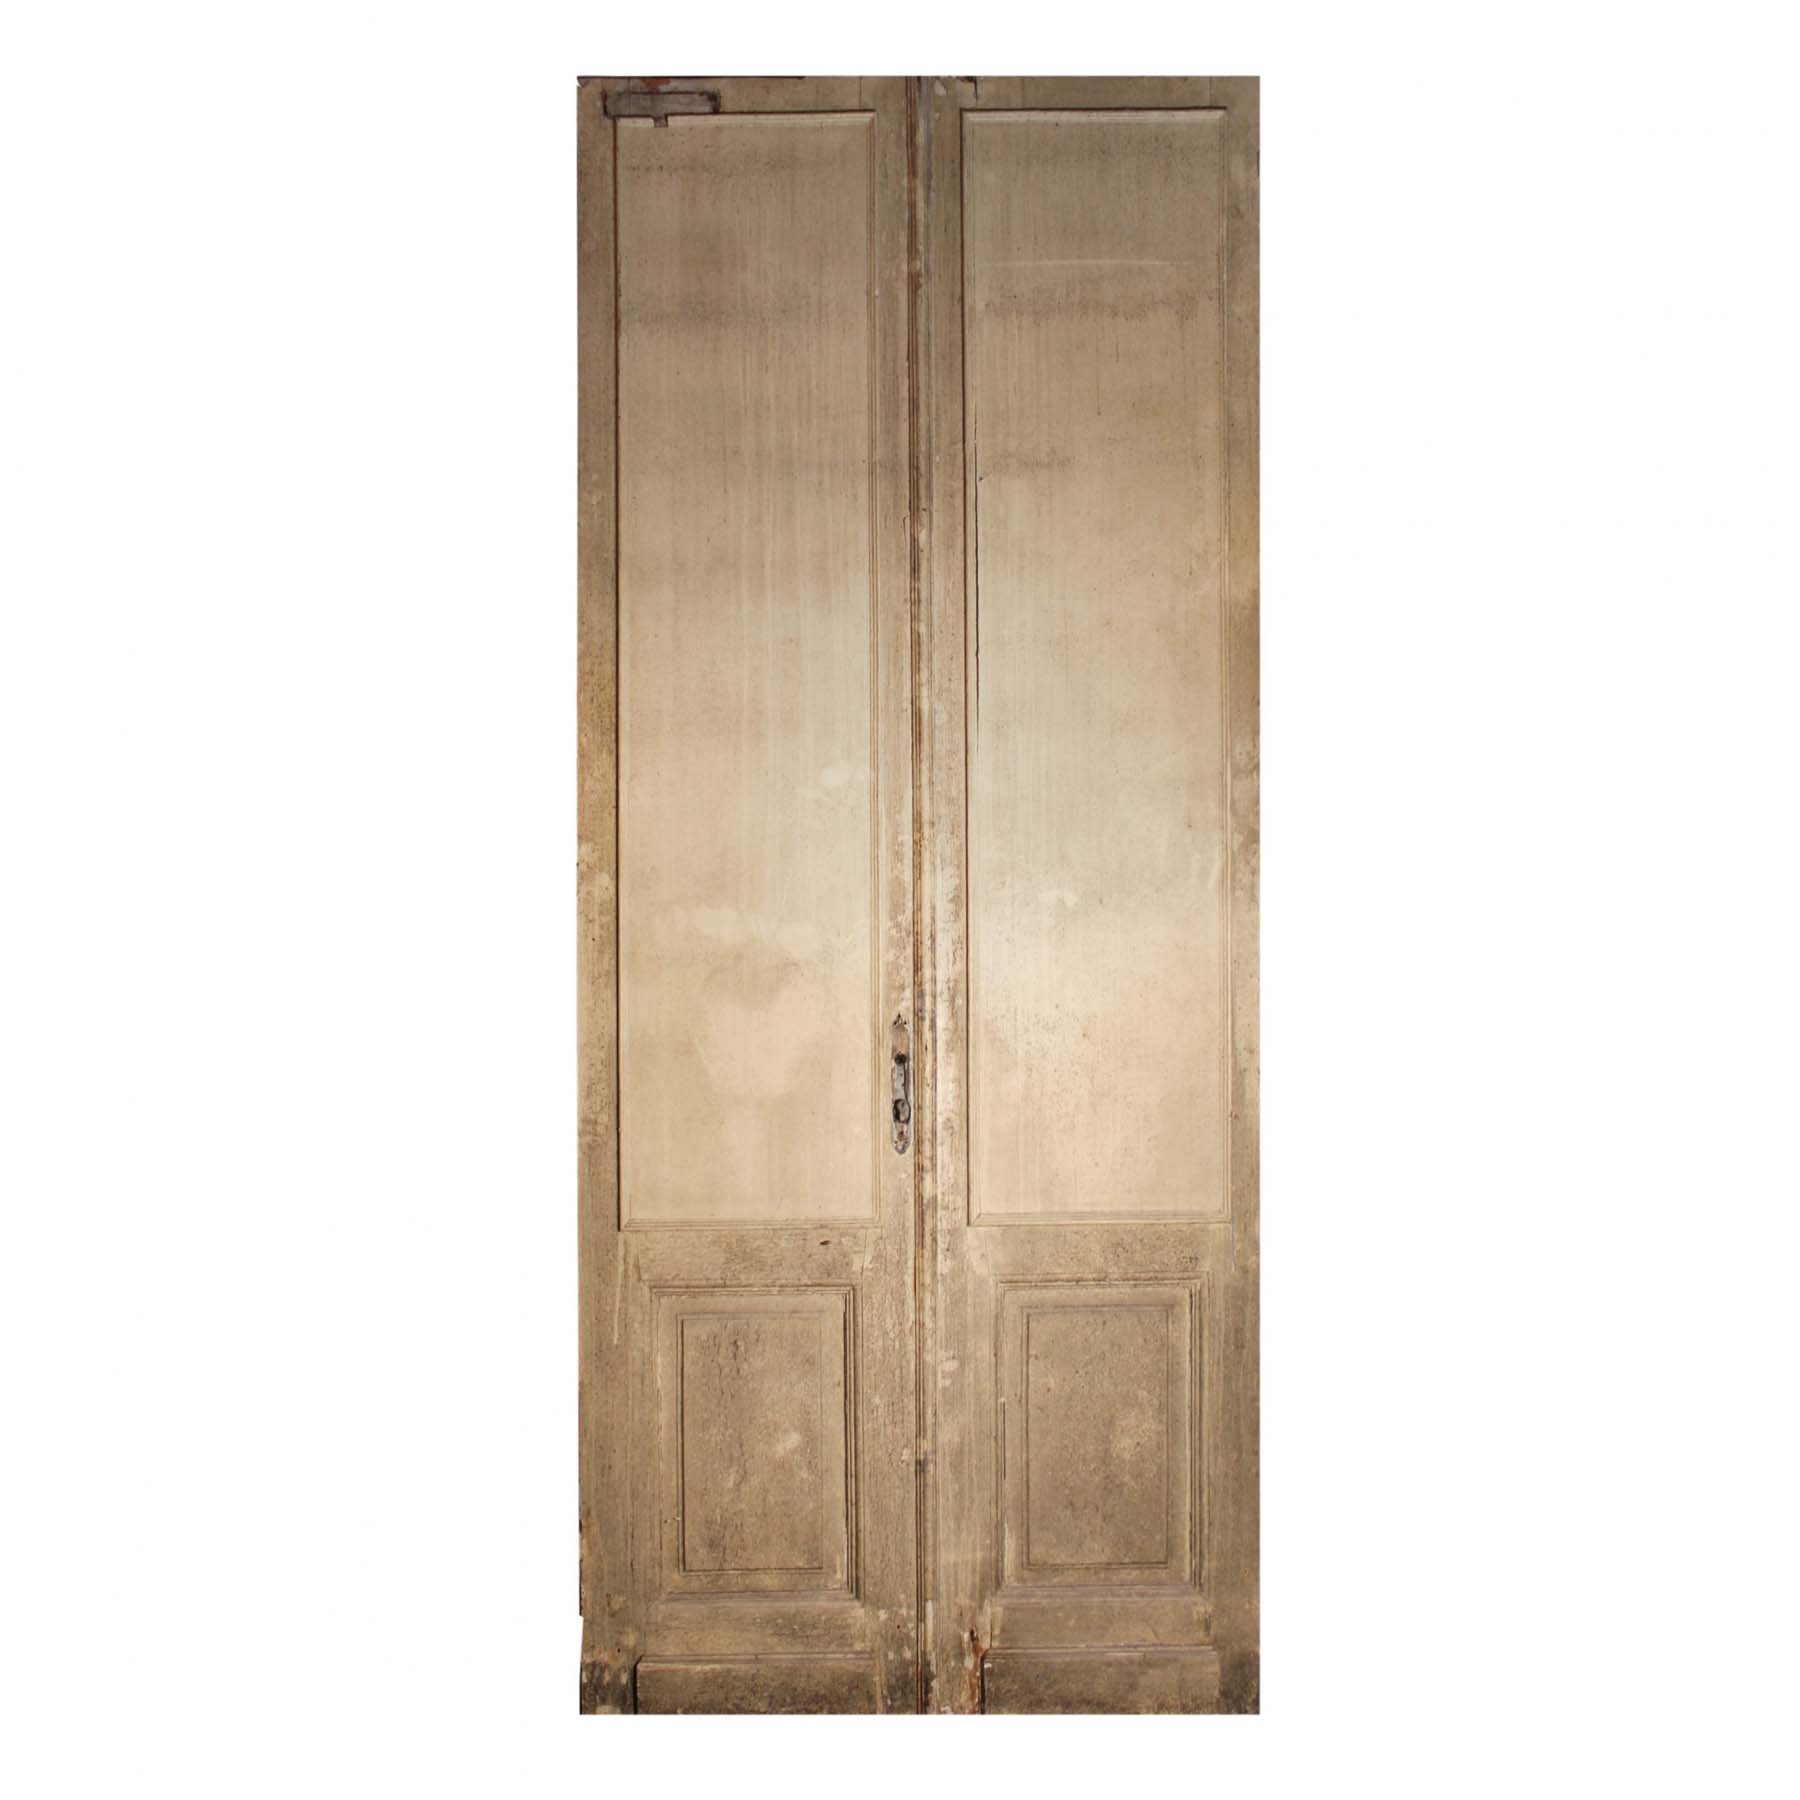 Reclaimed Pair of Antique 46" Double Doors with Glass-70960